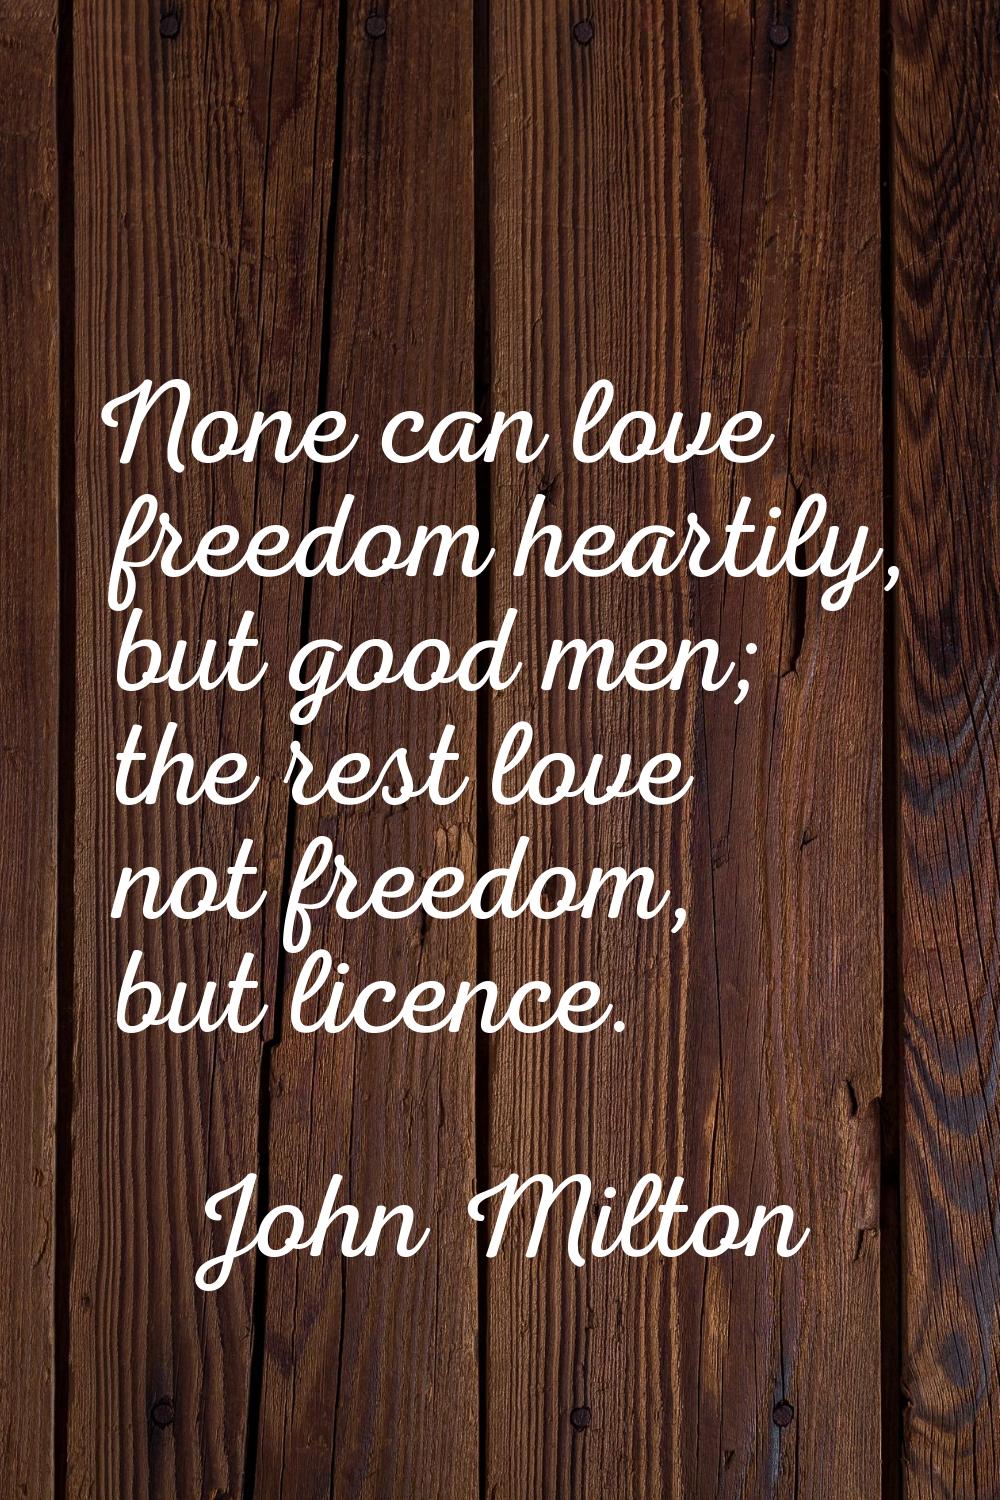 None can love freedom heartily, but good men; the rest love not freedom, but licence.